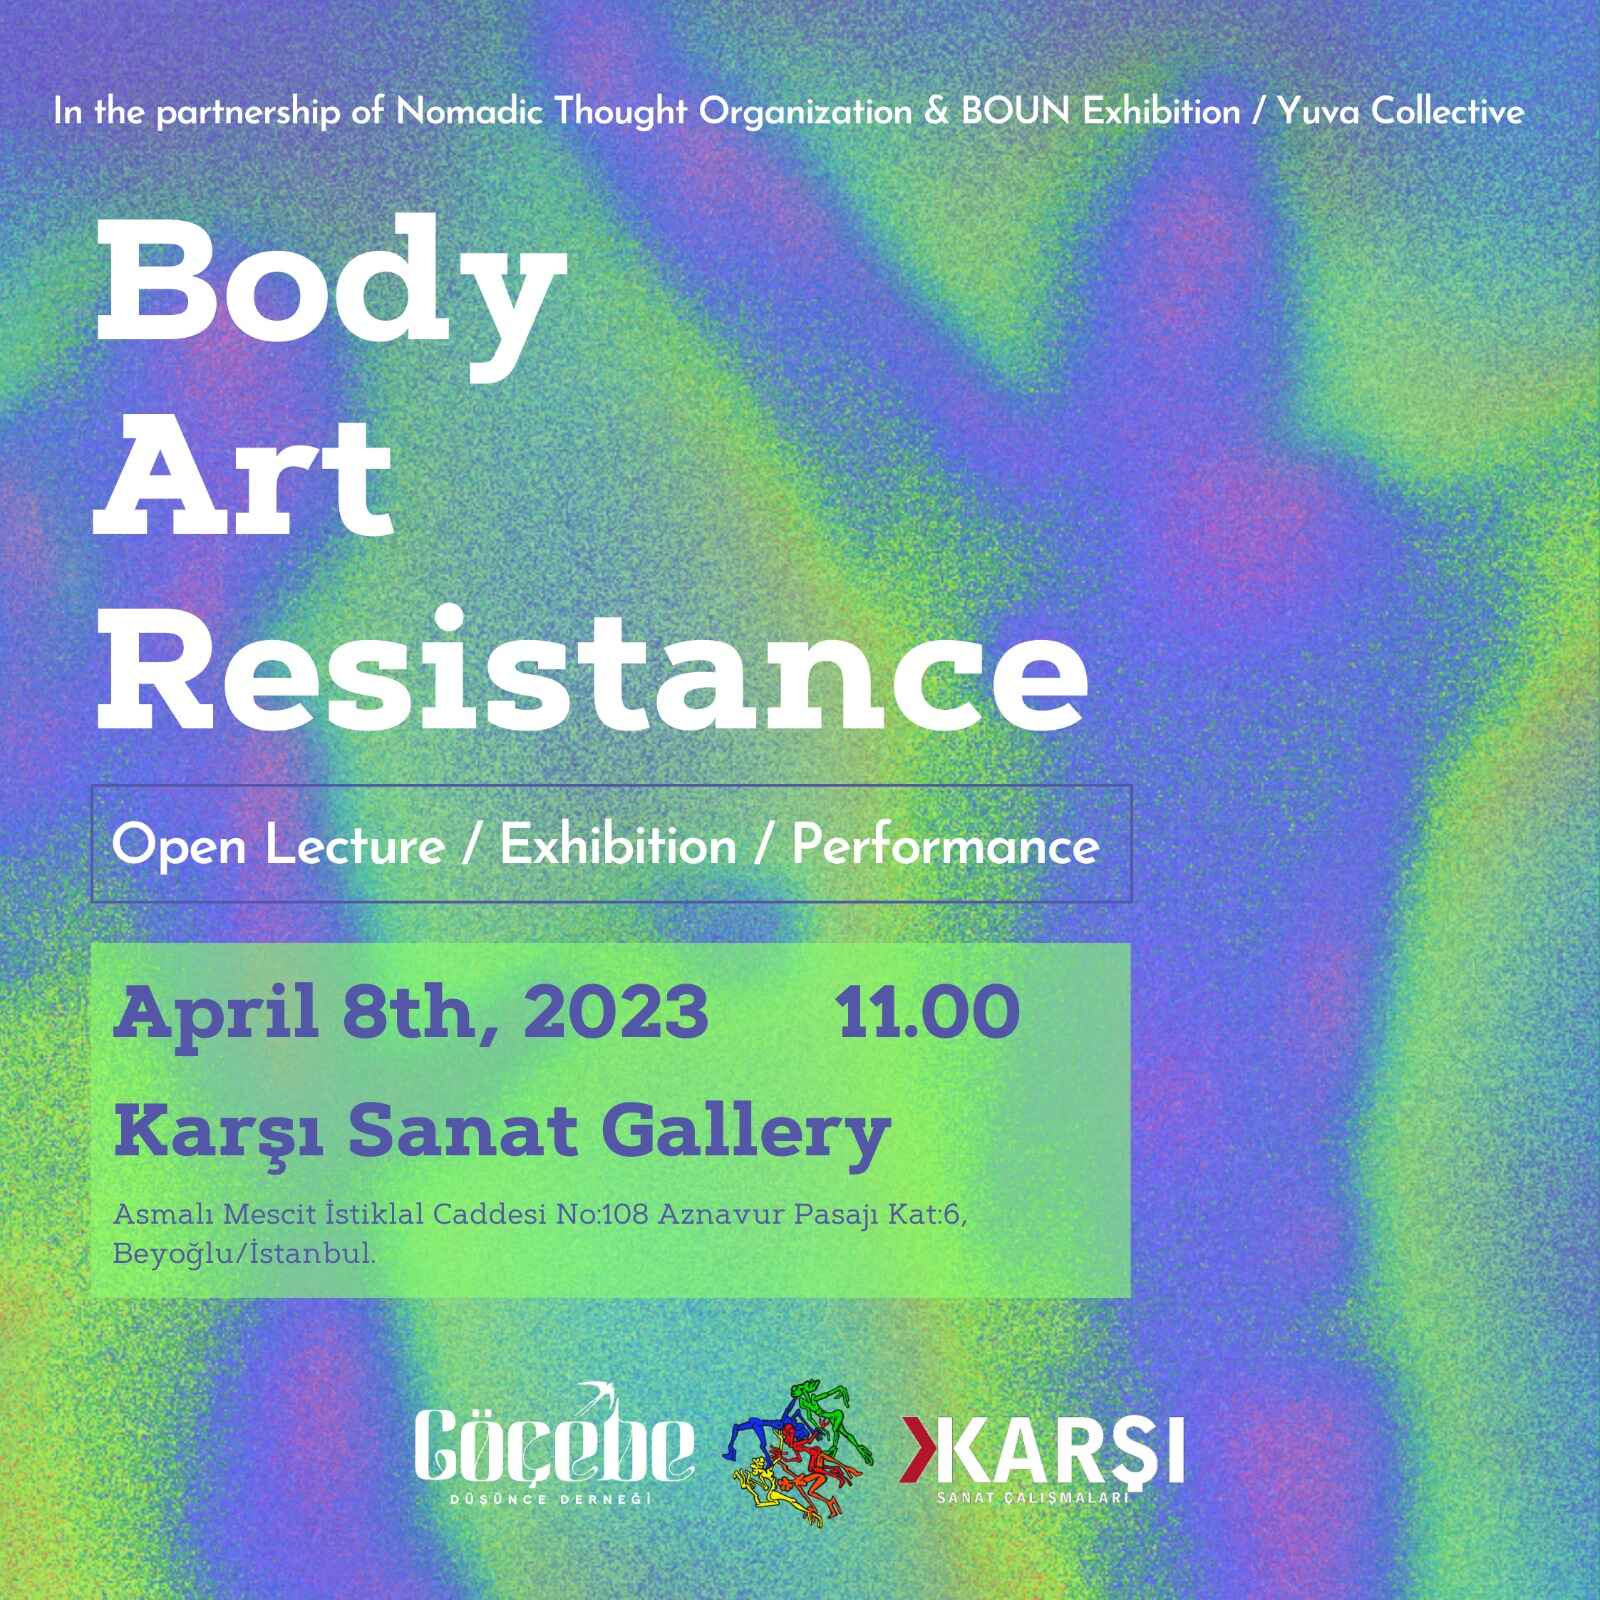 10/04/2023 - Neriman Polat at Art, Body And Resistance exhibition 